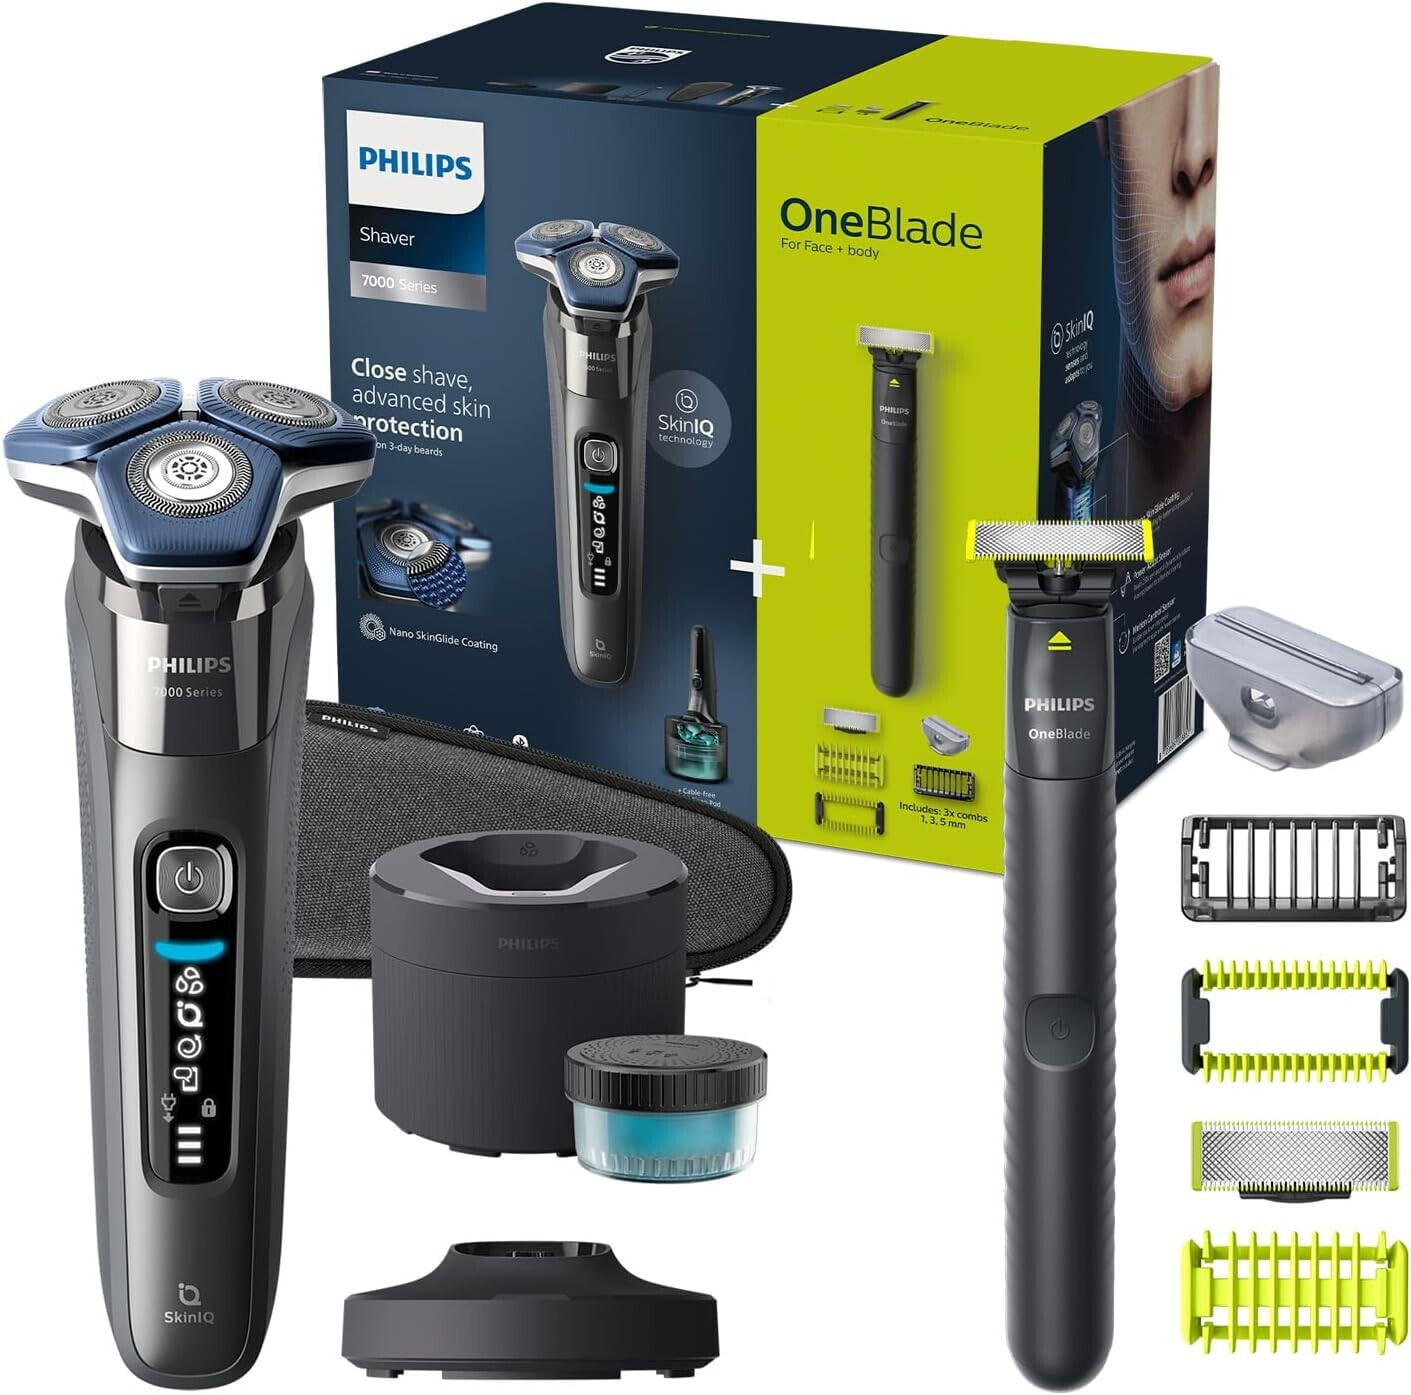 Philips Shaver Series 7000 Electric Wet and Dry Shaver with SkinIQ in Dark Chrome with Fold-Out Trimmer, Cleaning Station, Cleaning Cartridge & Philips OneBlade (Models S7887/78)